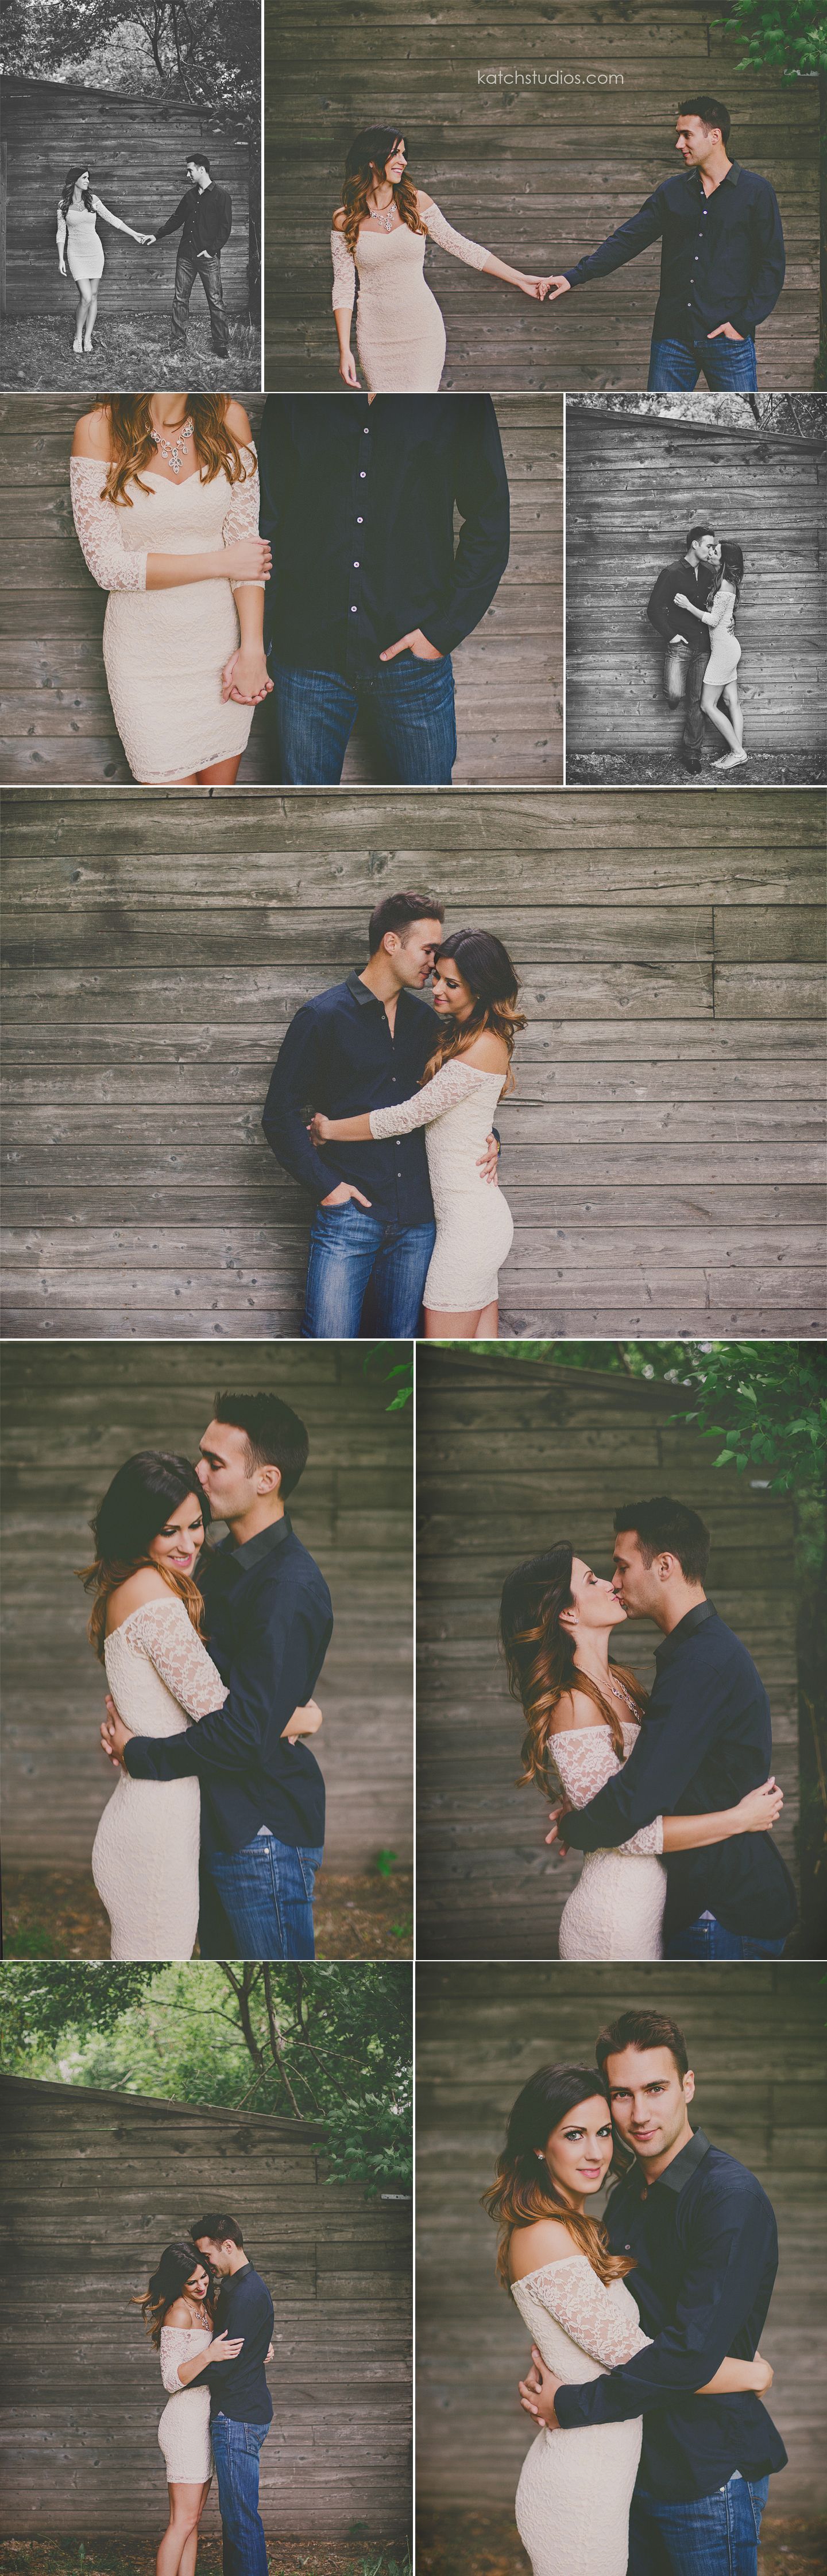 An engagement session I actually like